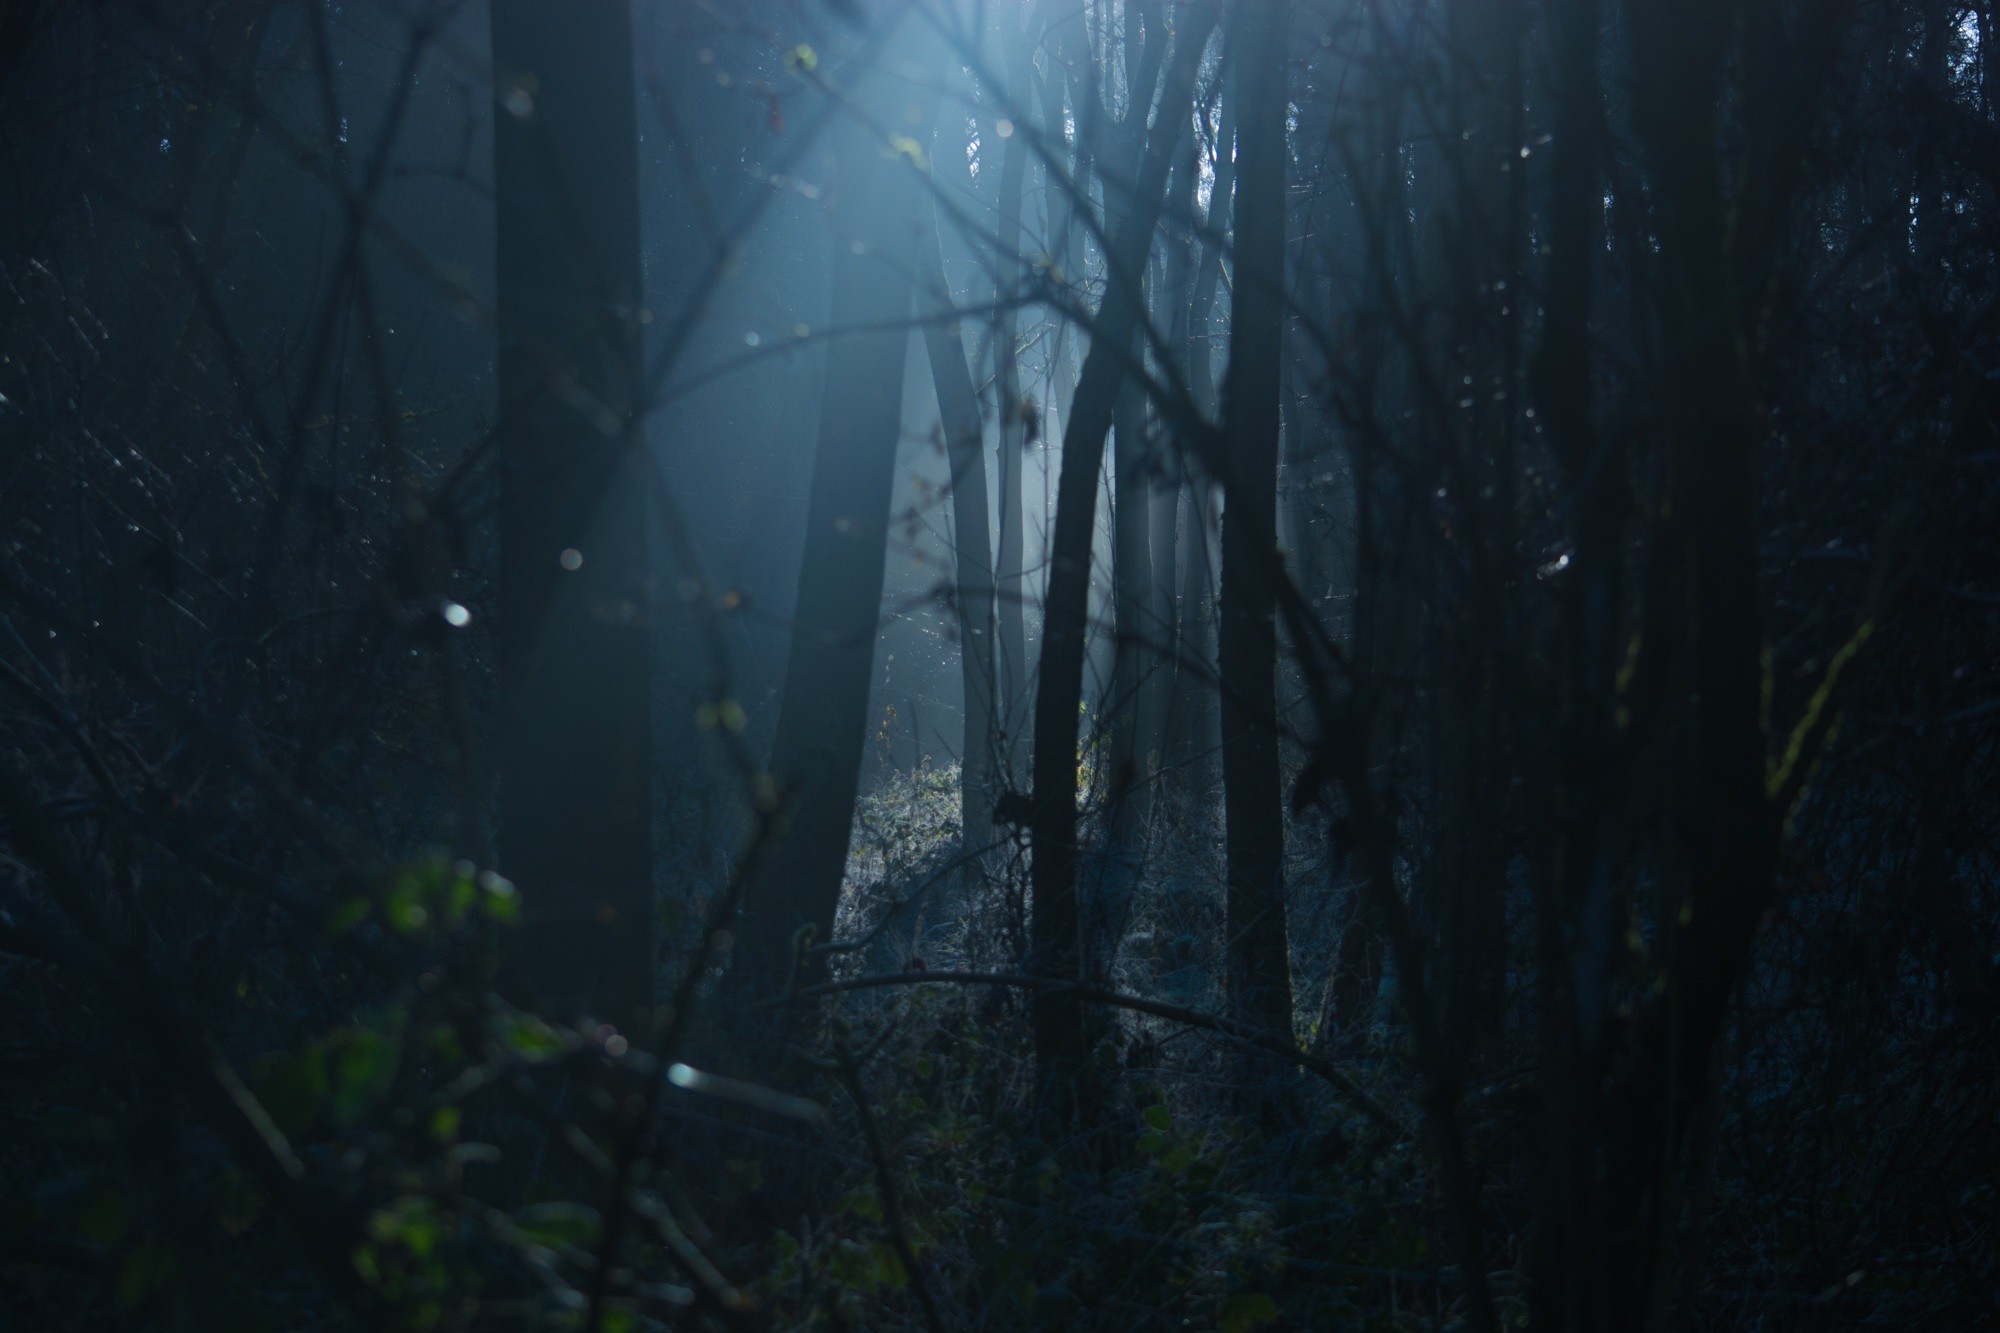 2000x1333 Free Images : landscape, tree, nature, forest, light, fog, mist, sunlight,  morning, moody, spooky, foggy, dark, mystery, reflection, jungle,  halloween, ...